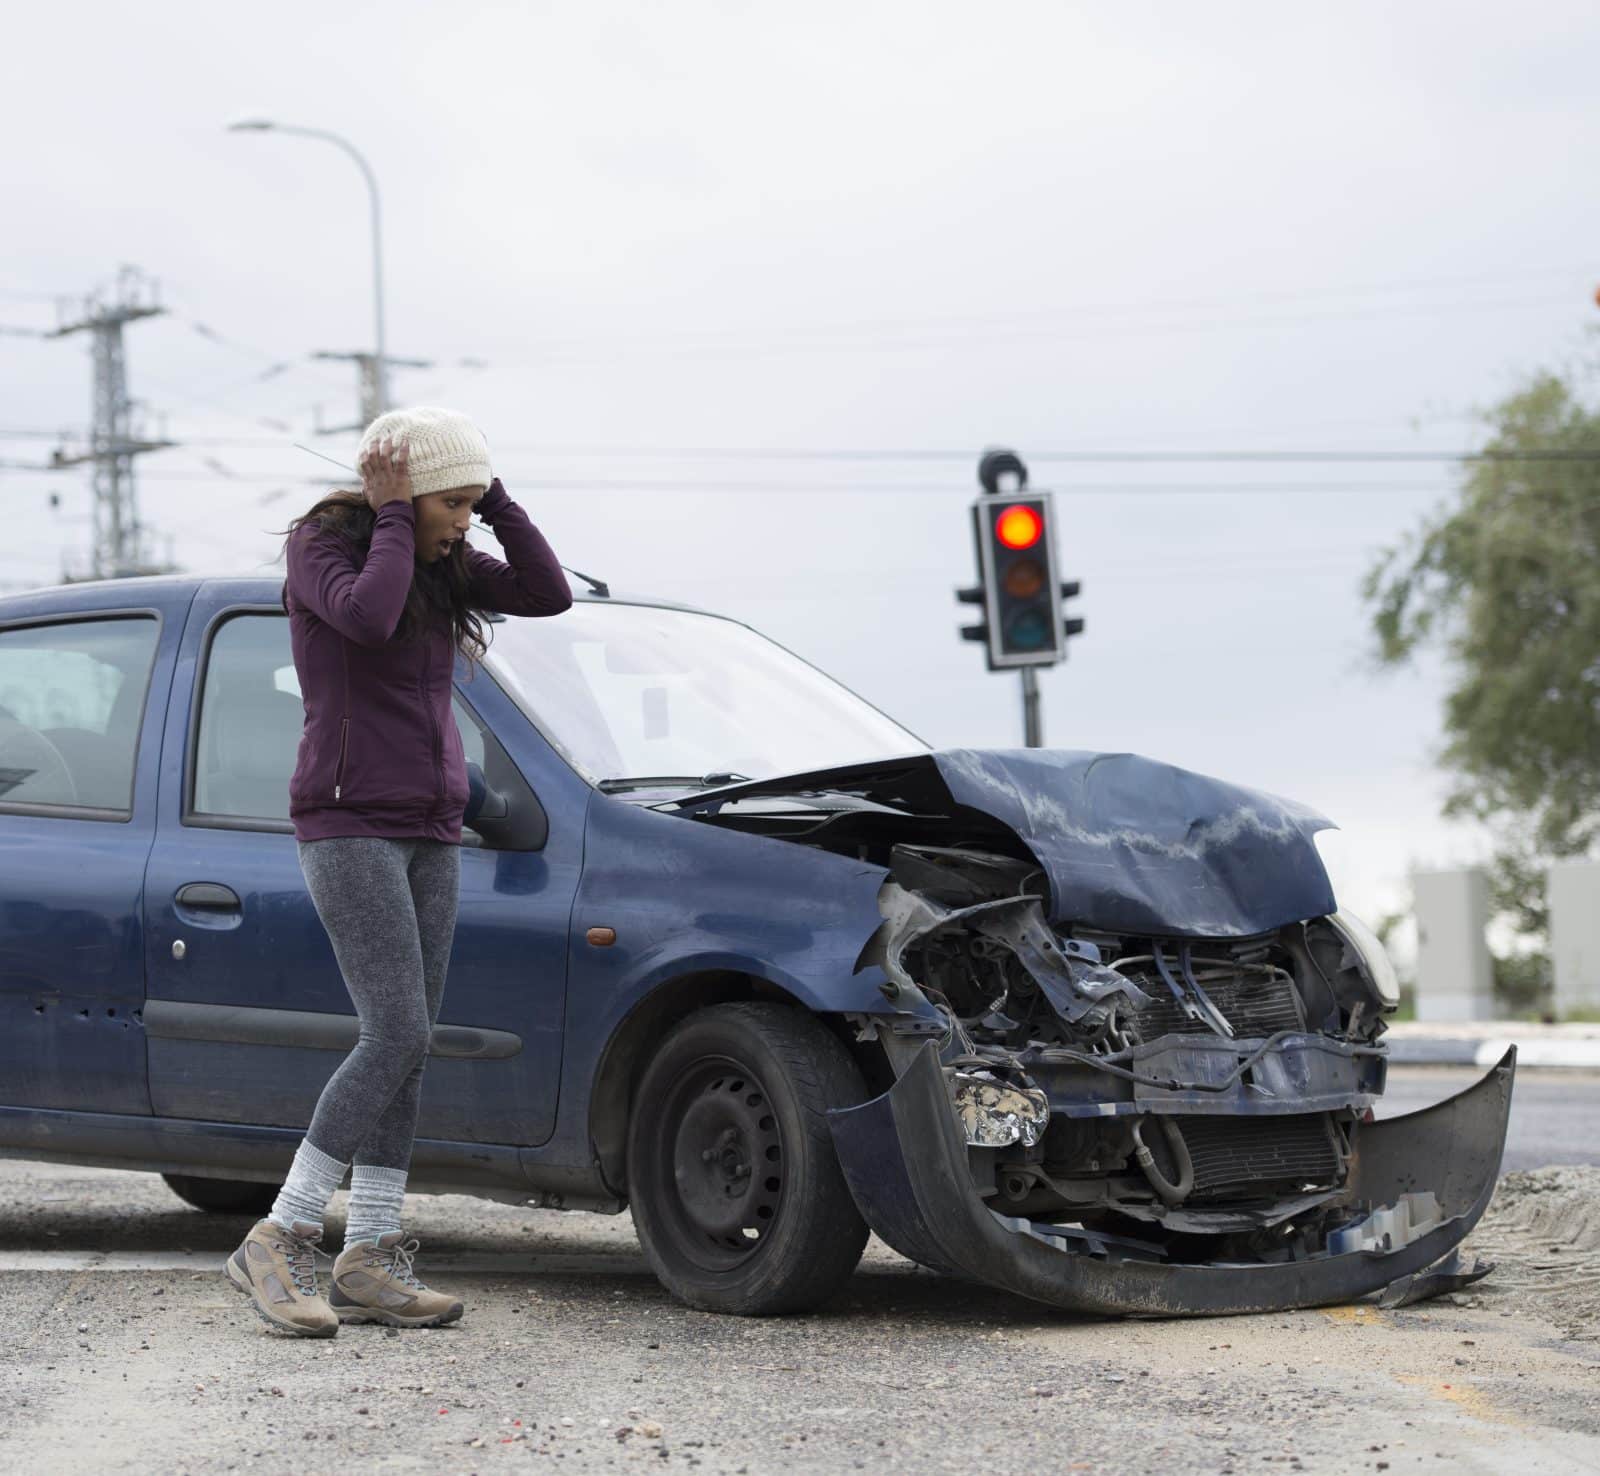 Woman with shocked face looking on her damaged car, holding head in hands. Car accident with frontal impact. Red traffic light is on background.